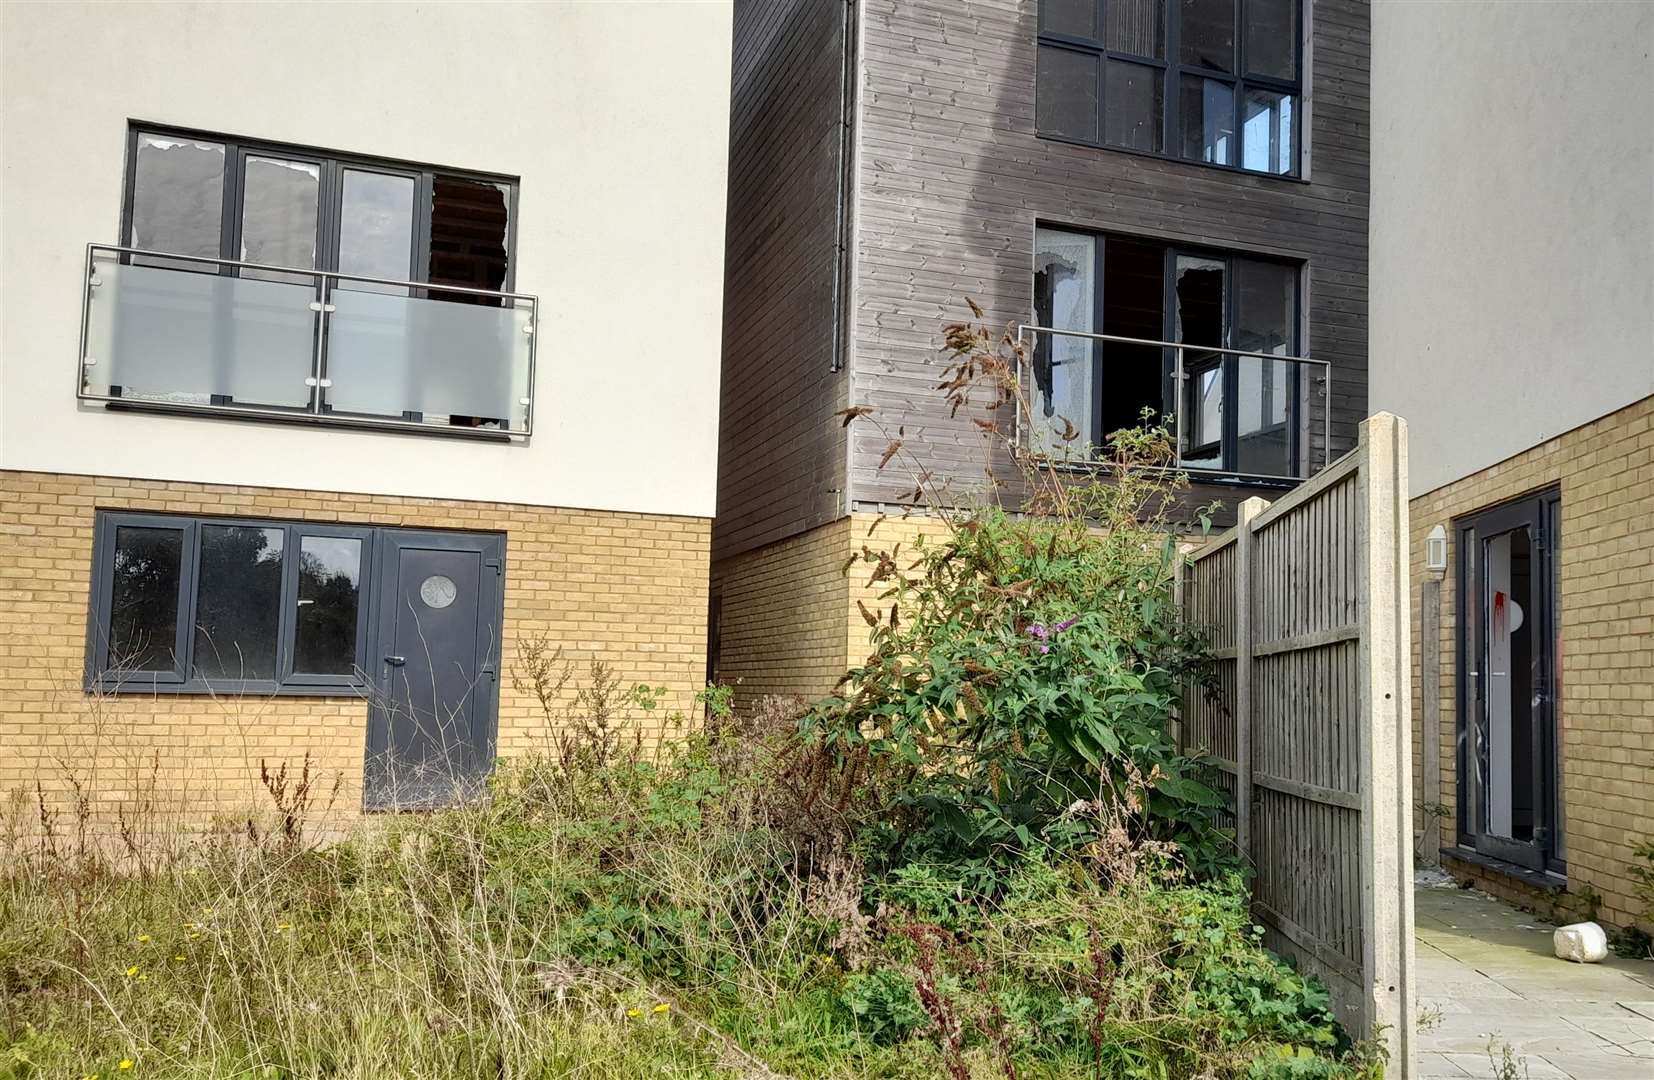 Windows are smashed across the development